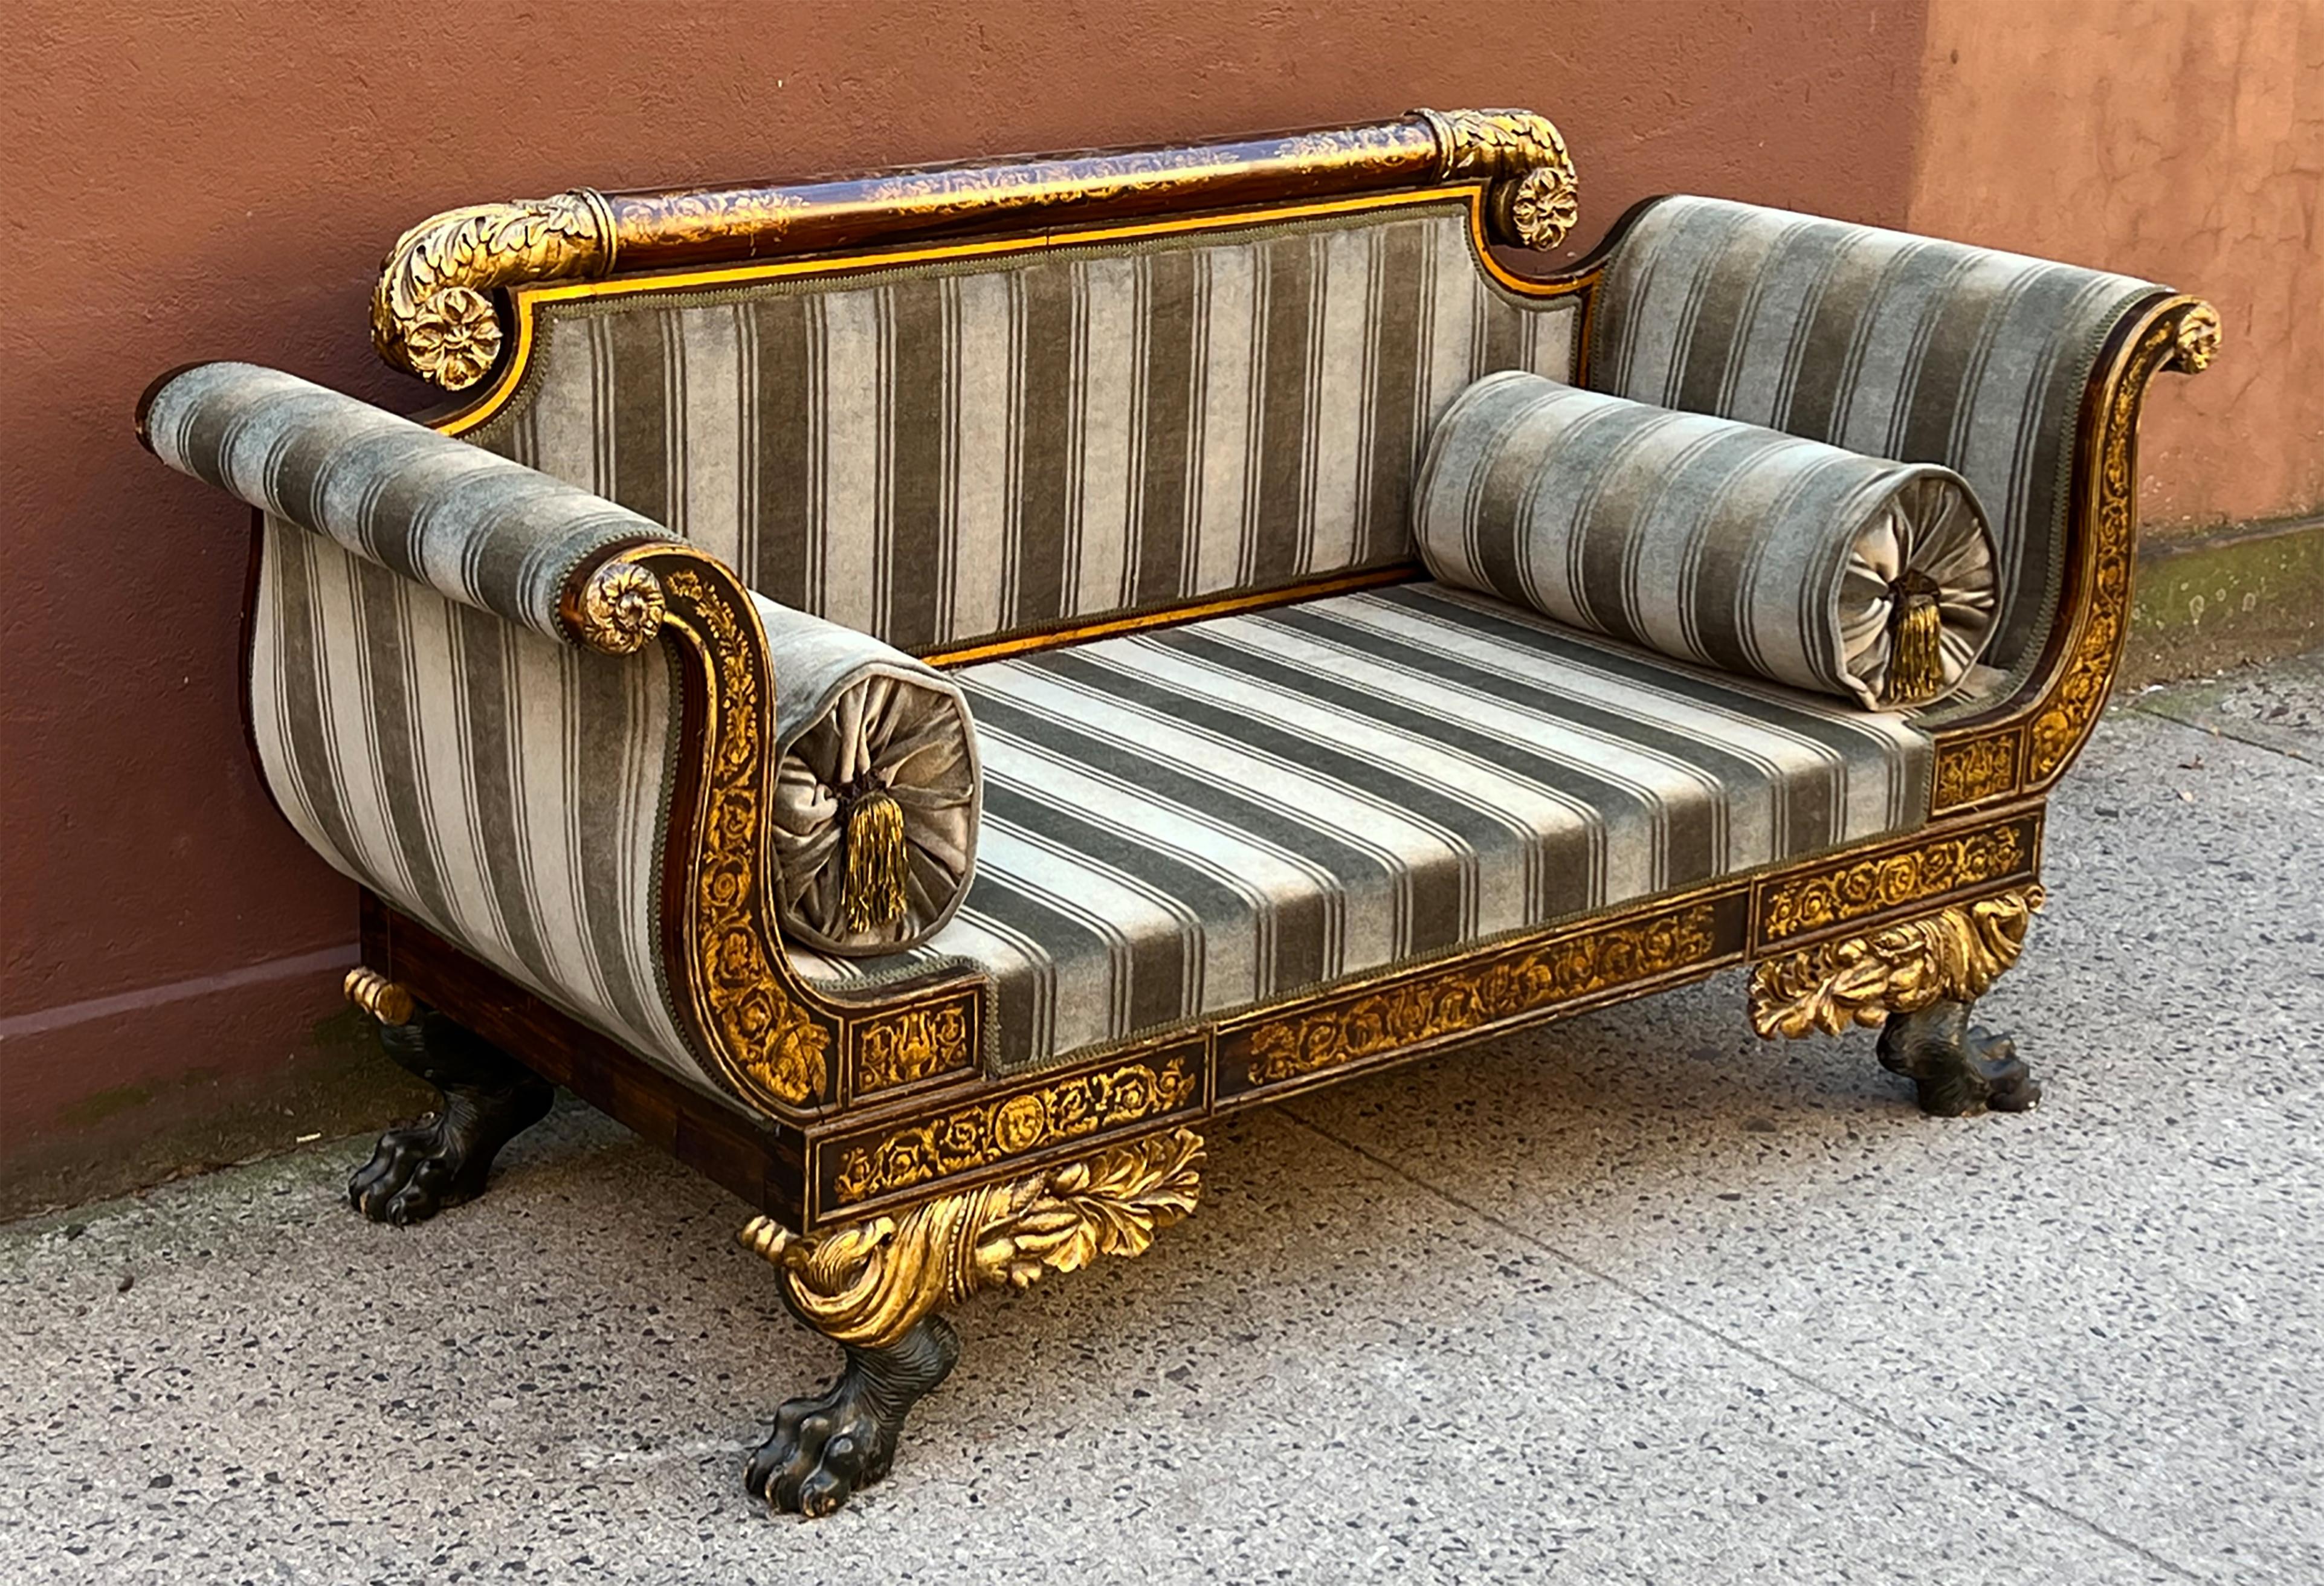 A spectacular American Empire sofa with exquisite detailing and design. One of the masterpieces of Federal New York furniture, this circa 1820 parcel gilt sofa with faux bois Rosewood graining almost certainly originates from the same shop as a